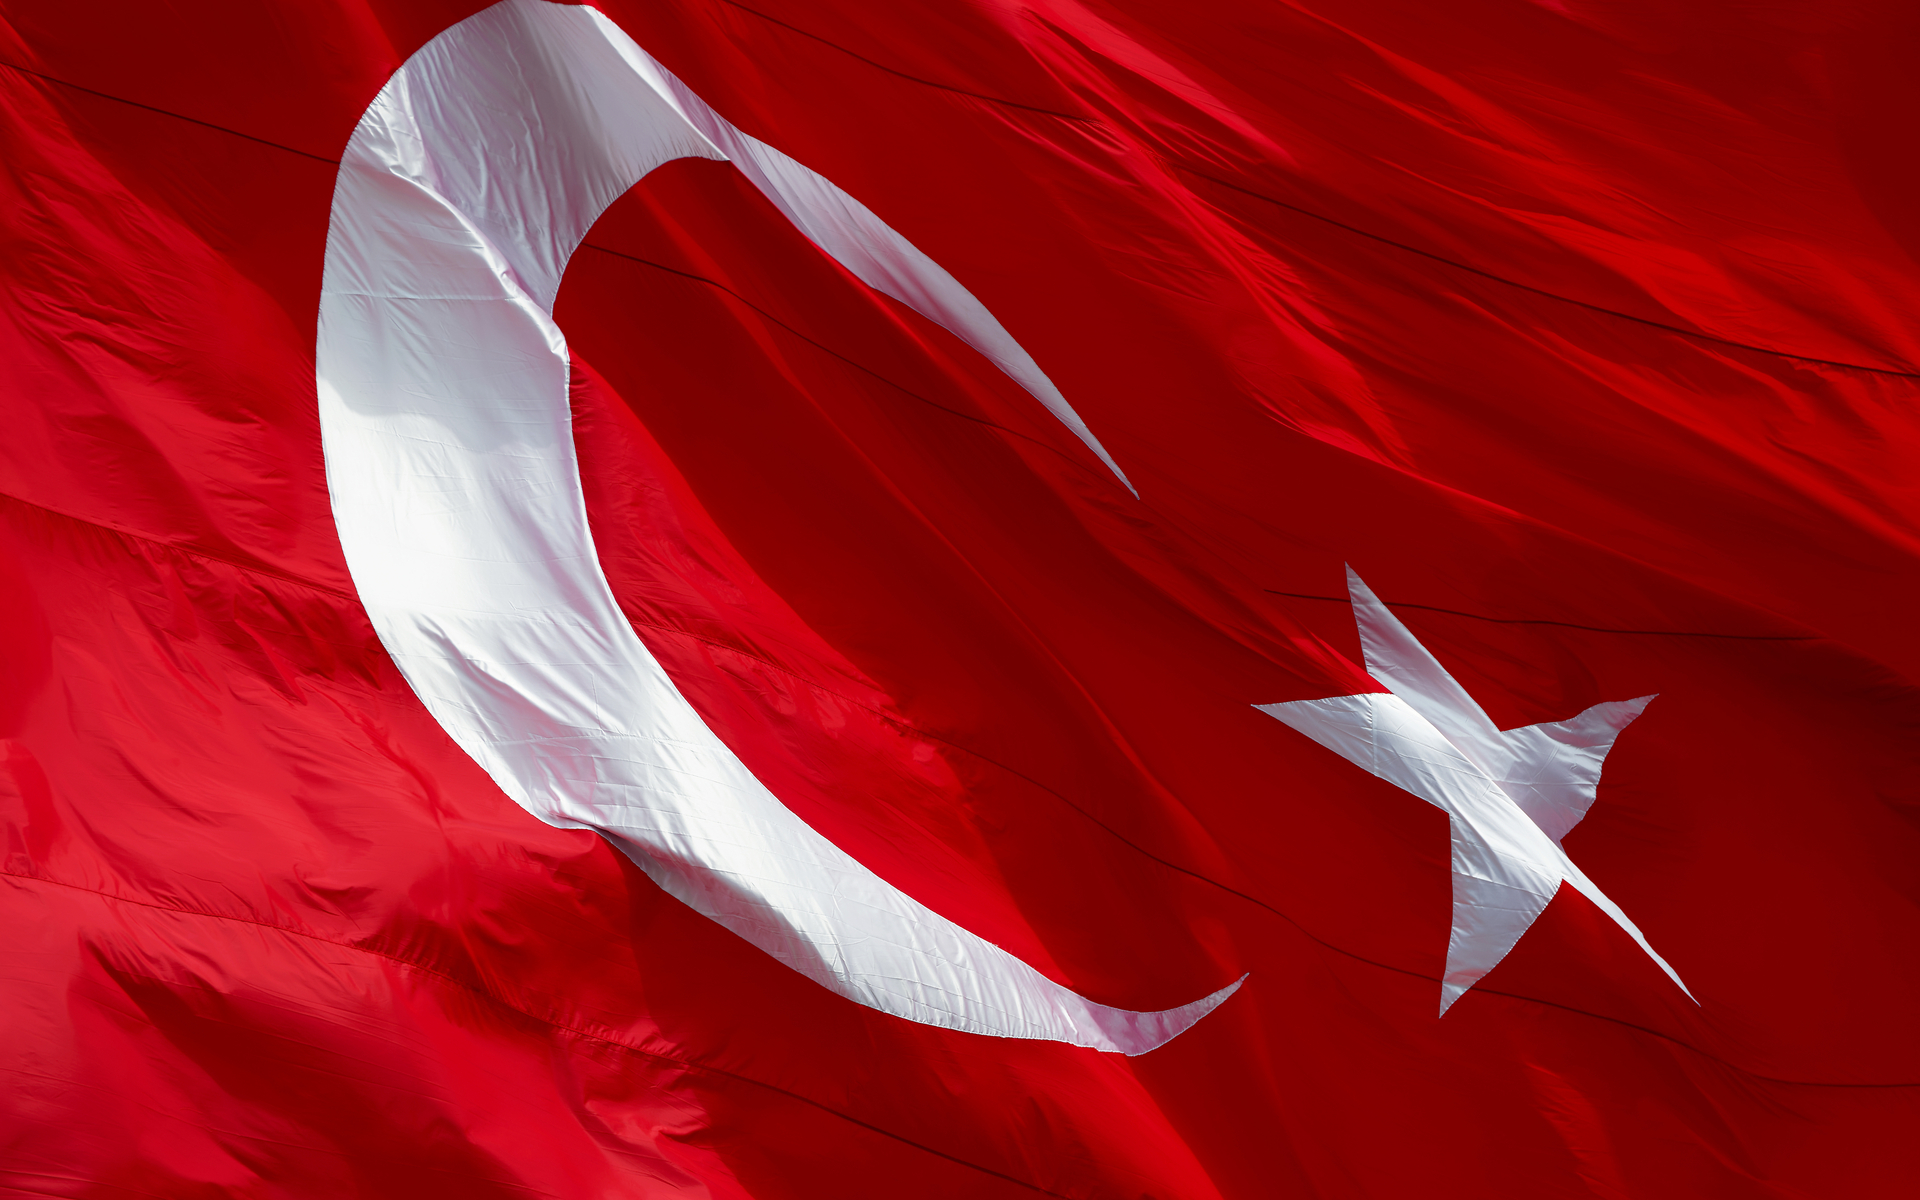 Bitcoin Just as Popular as Forex in Turkey